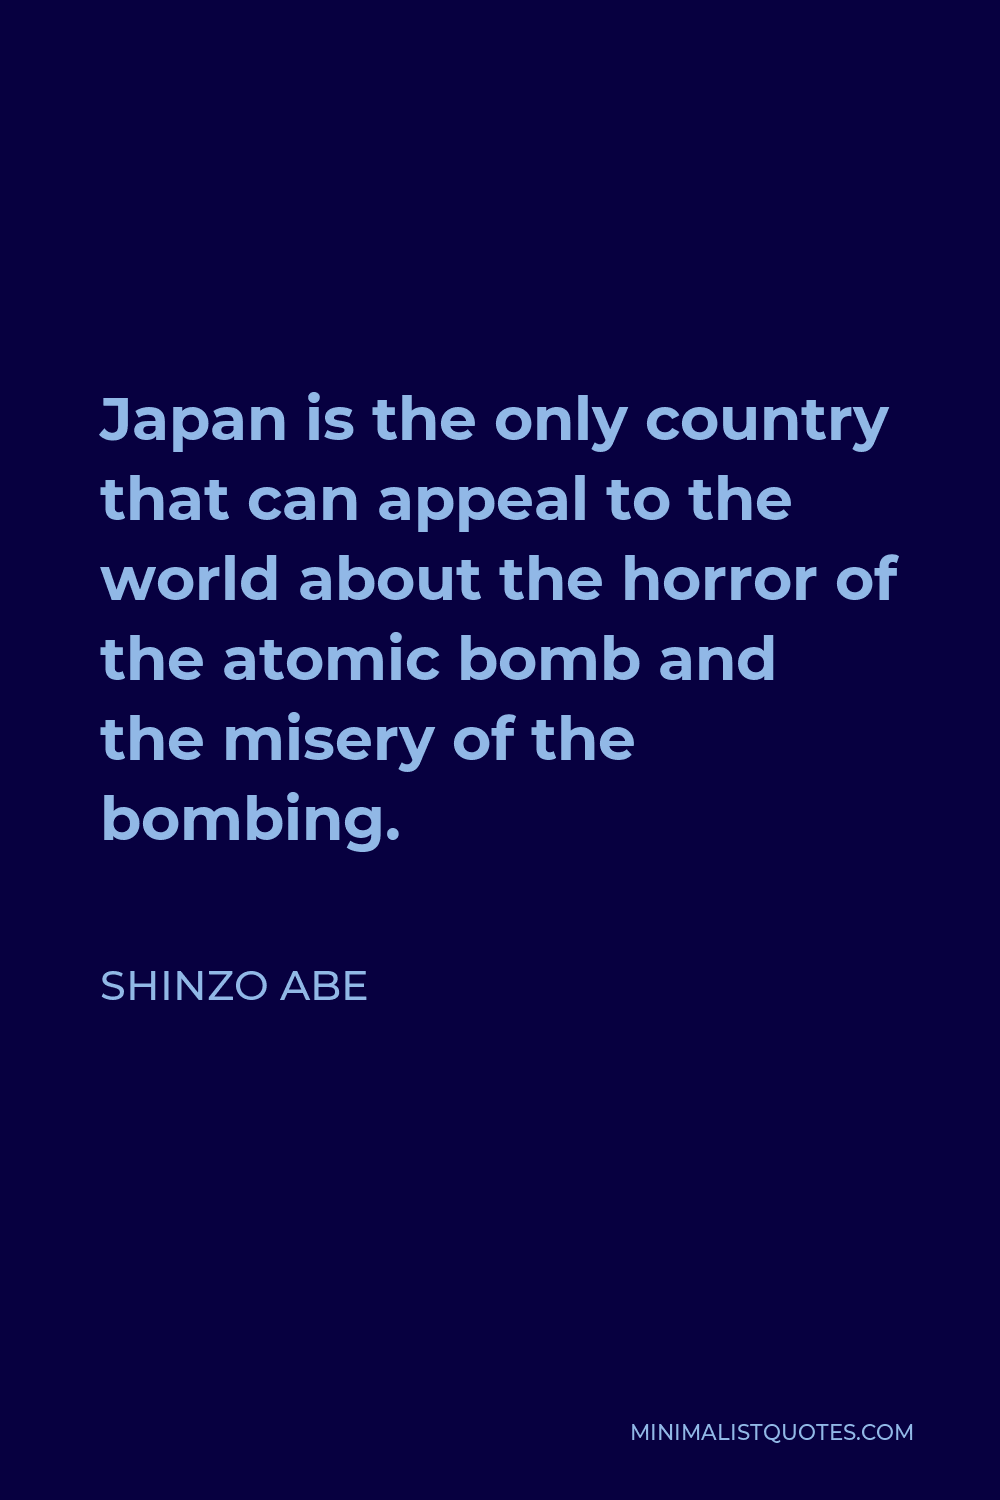 Shinzo Abe Quote - Japan is the only country that can appeal to the world about the horror of the atomic bomb and the misery of the bombing.